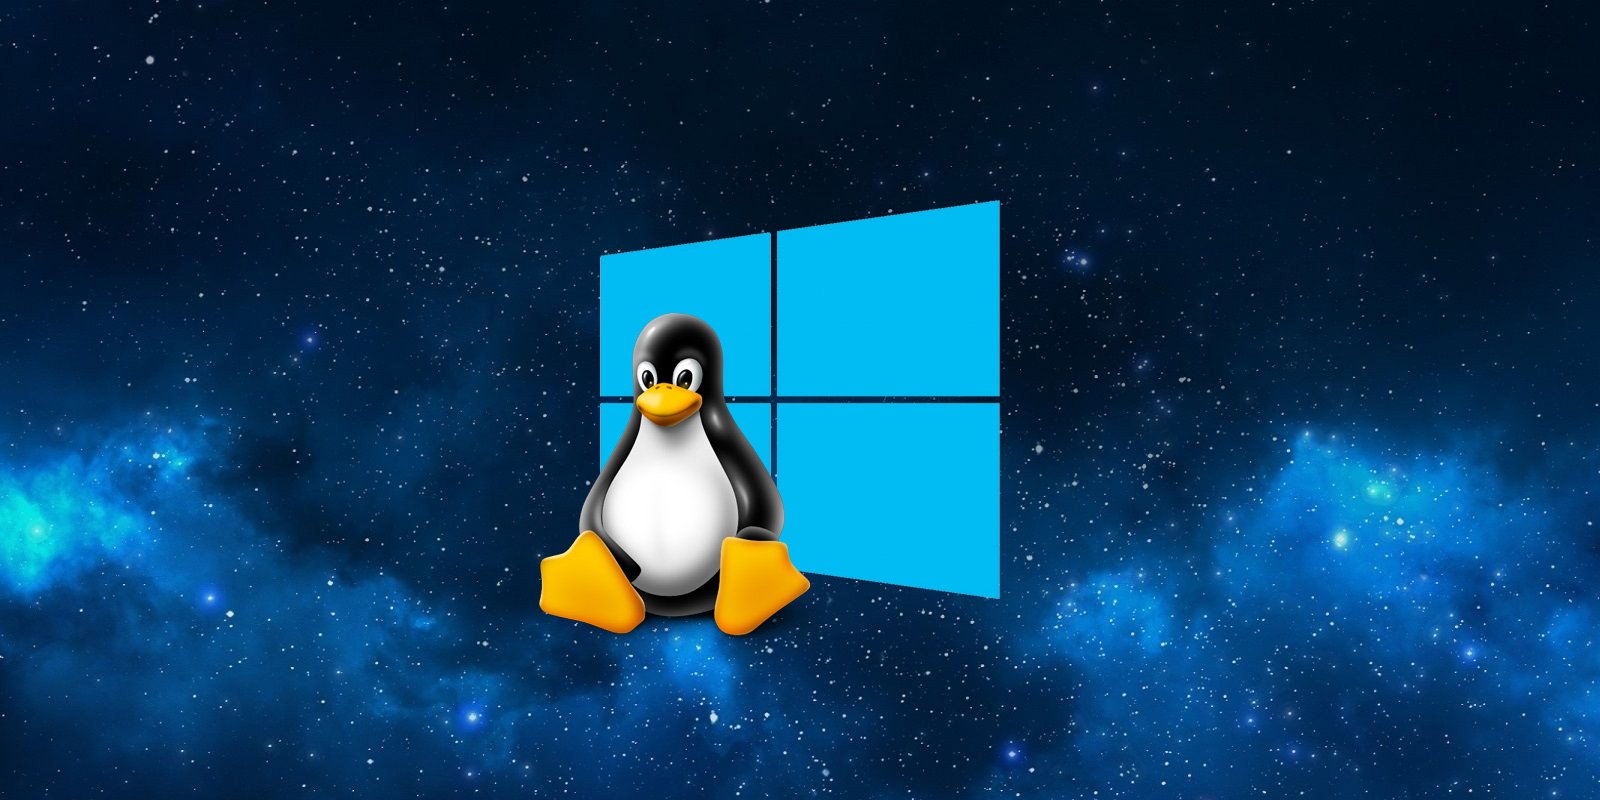 Windows 10 now lets you seamlessly run Linux GUI apps